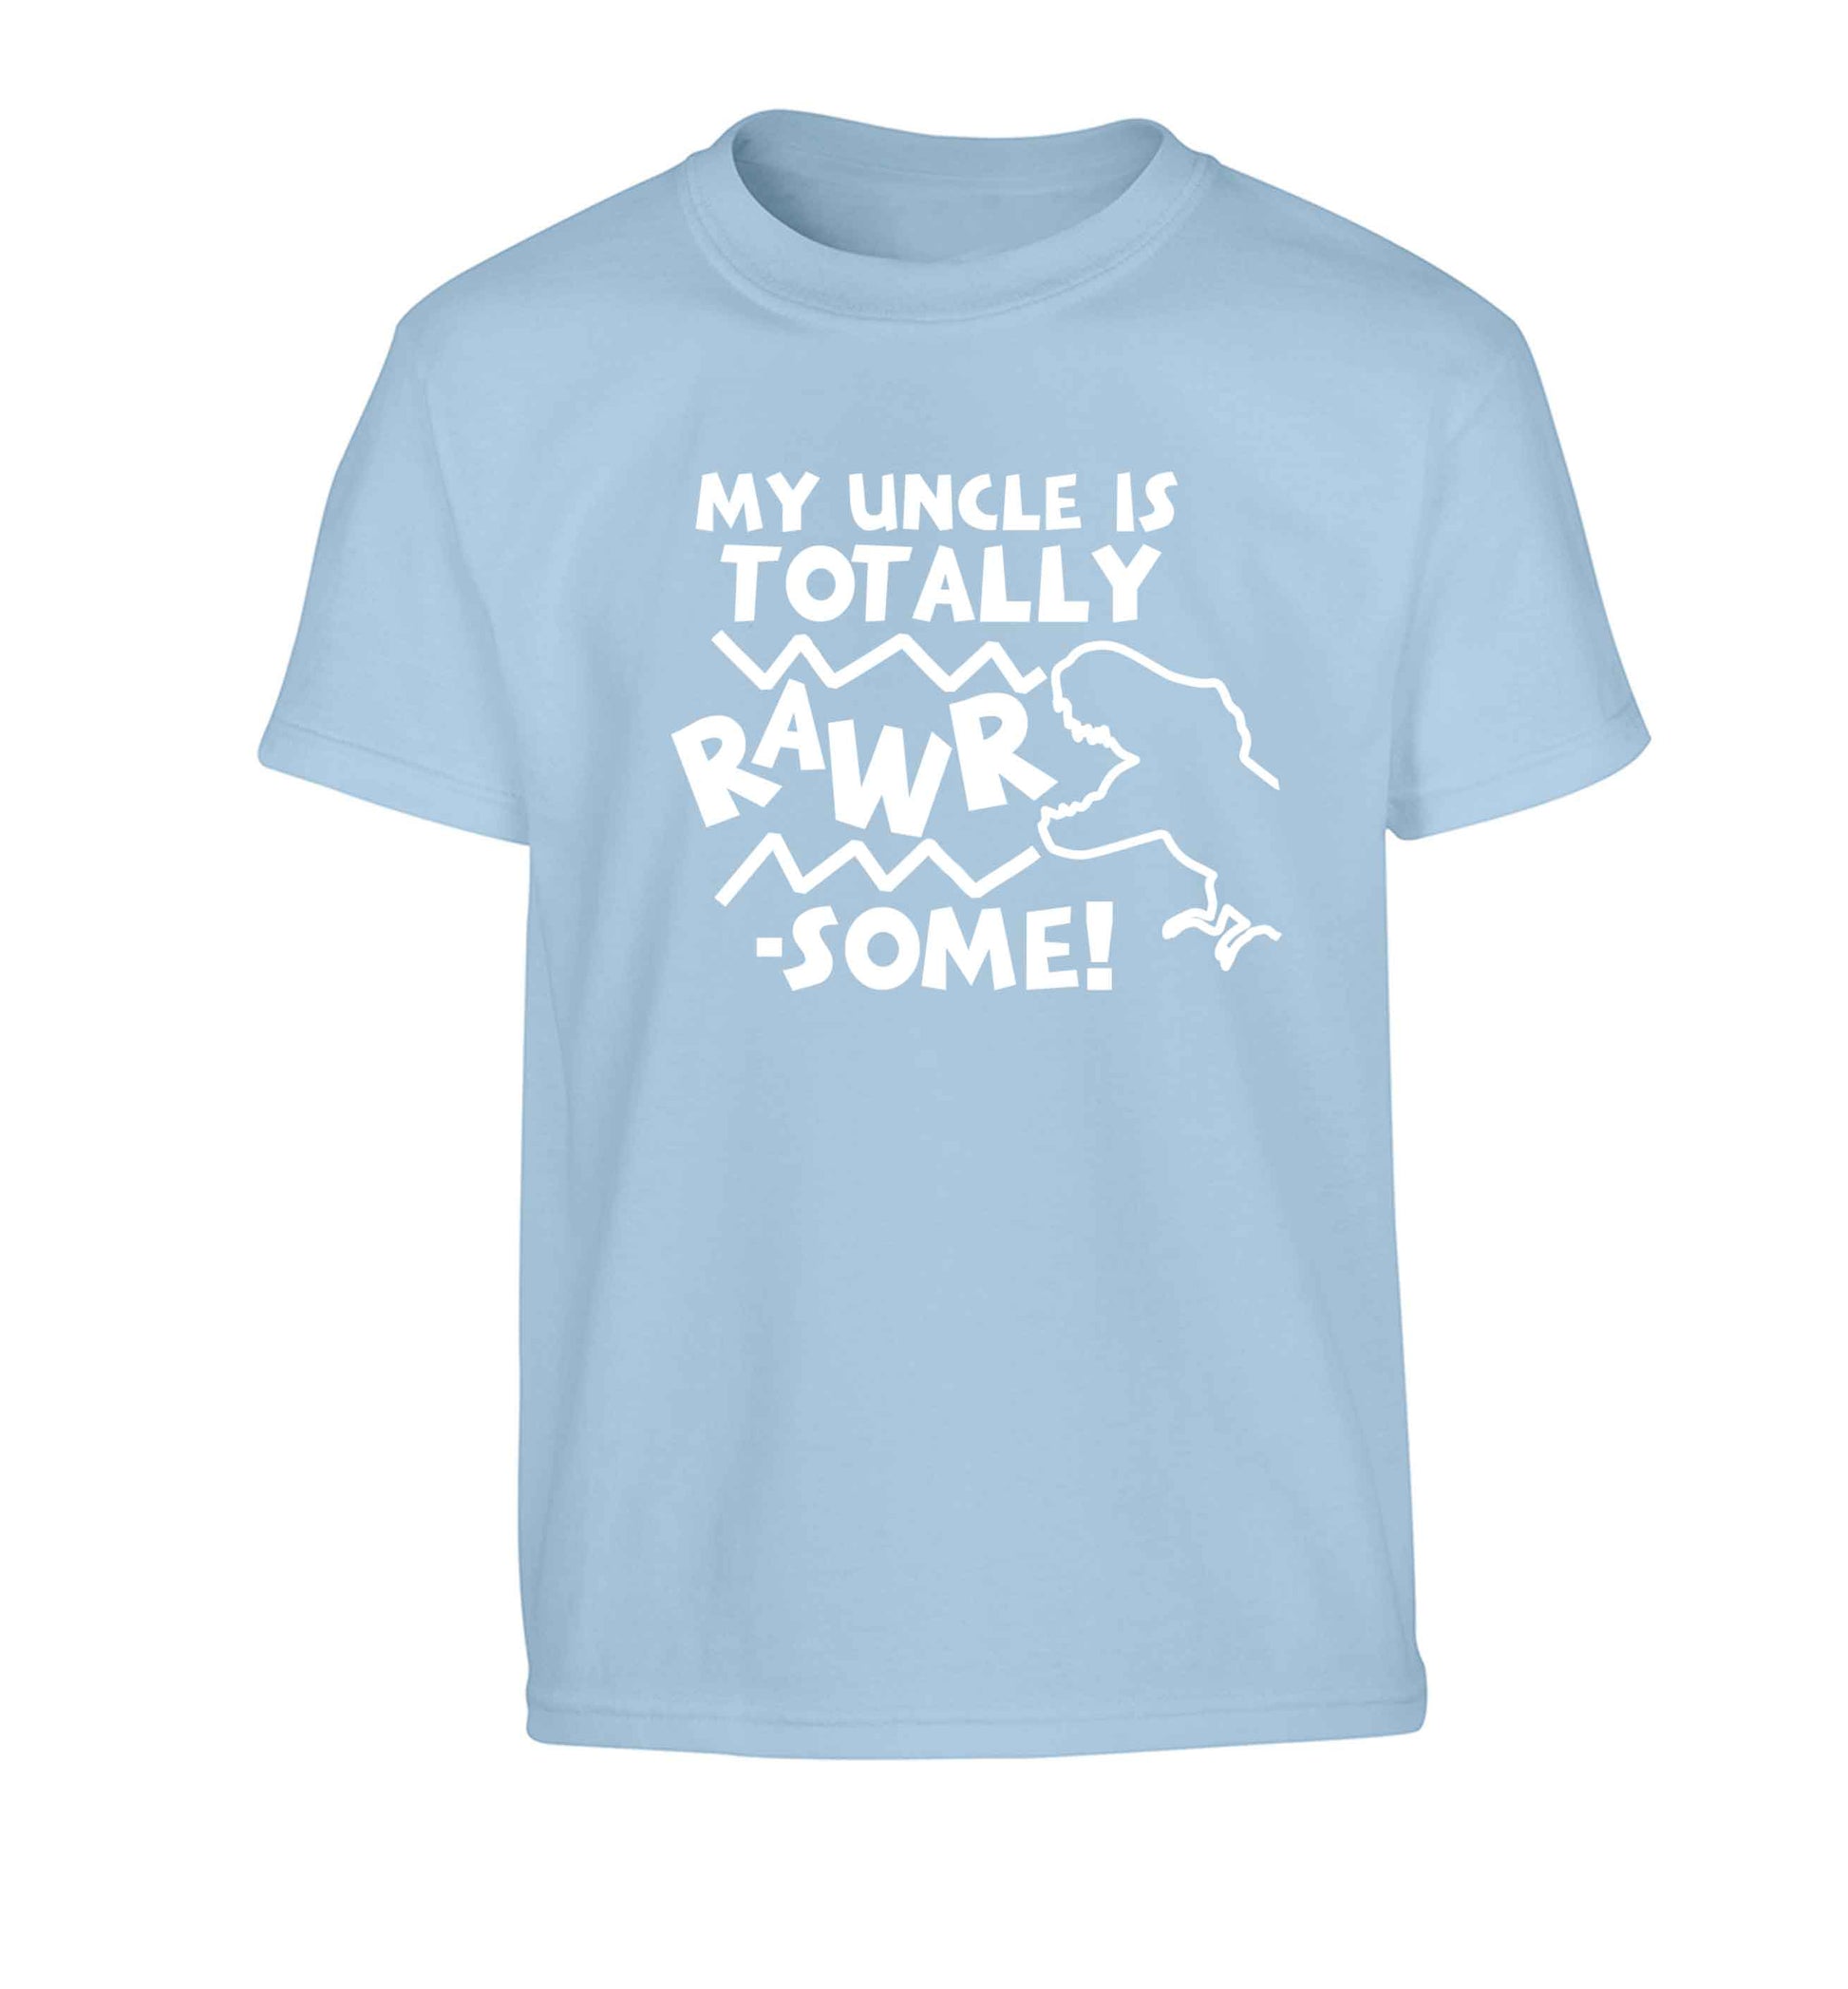 My uncle is totally rawrsome Children's light blue Tshirt 12-13 Years